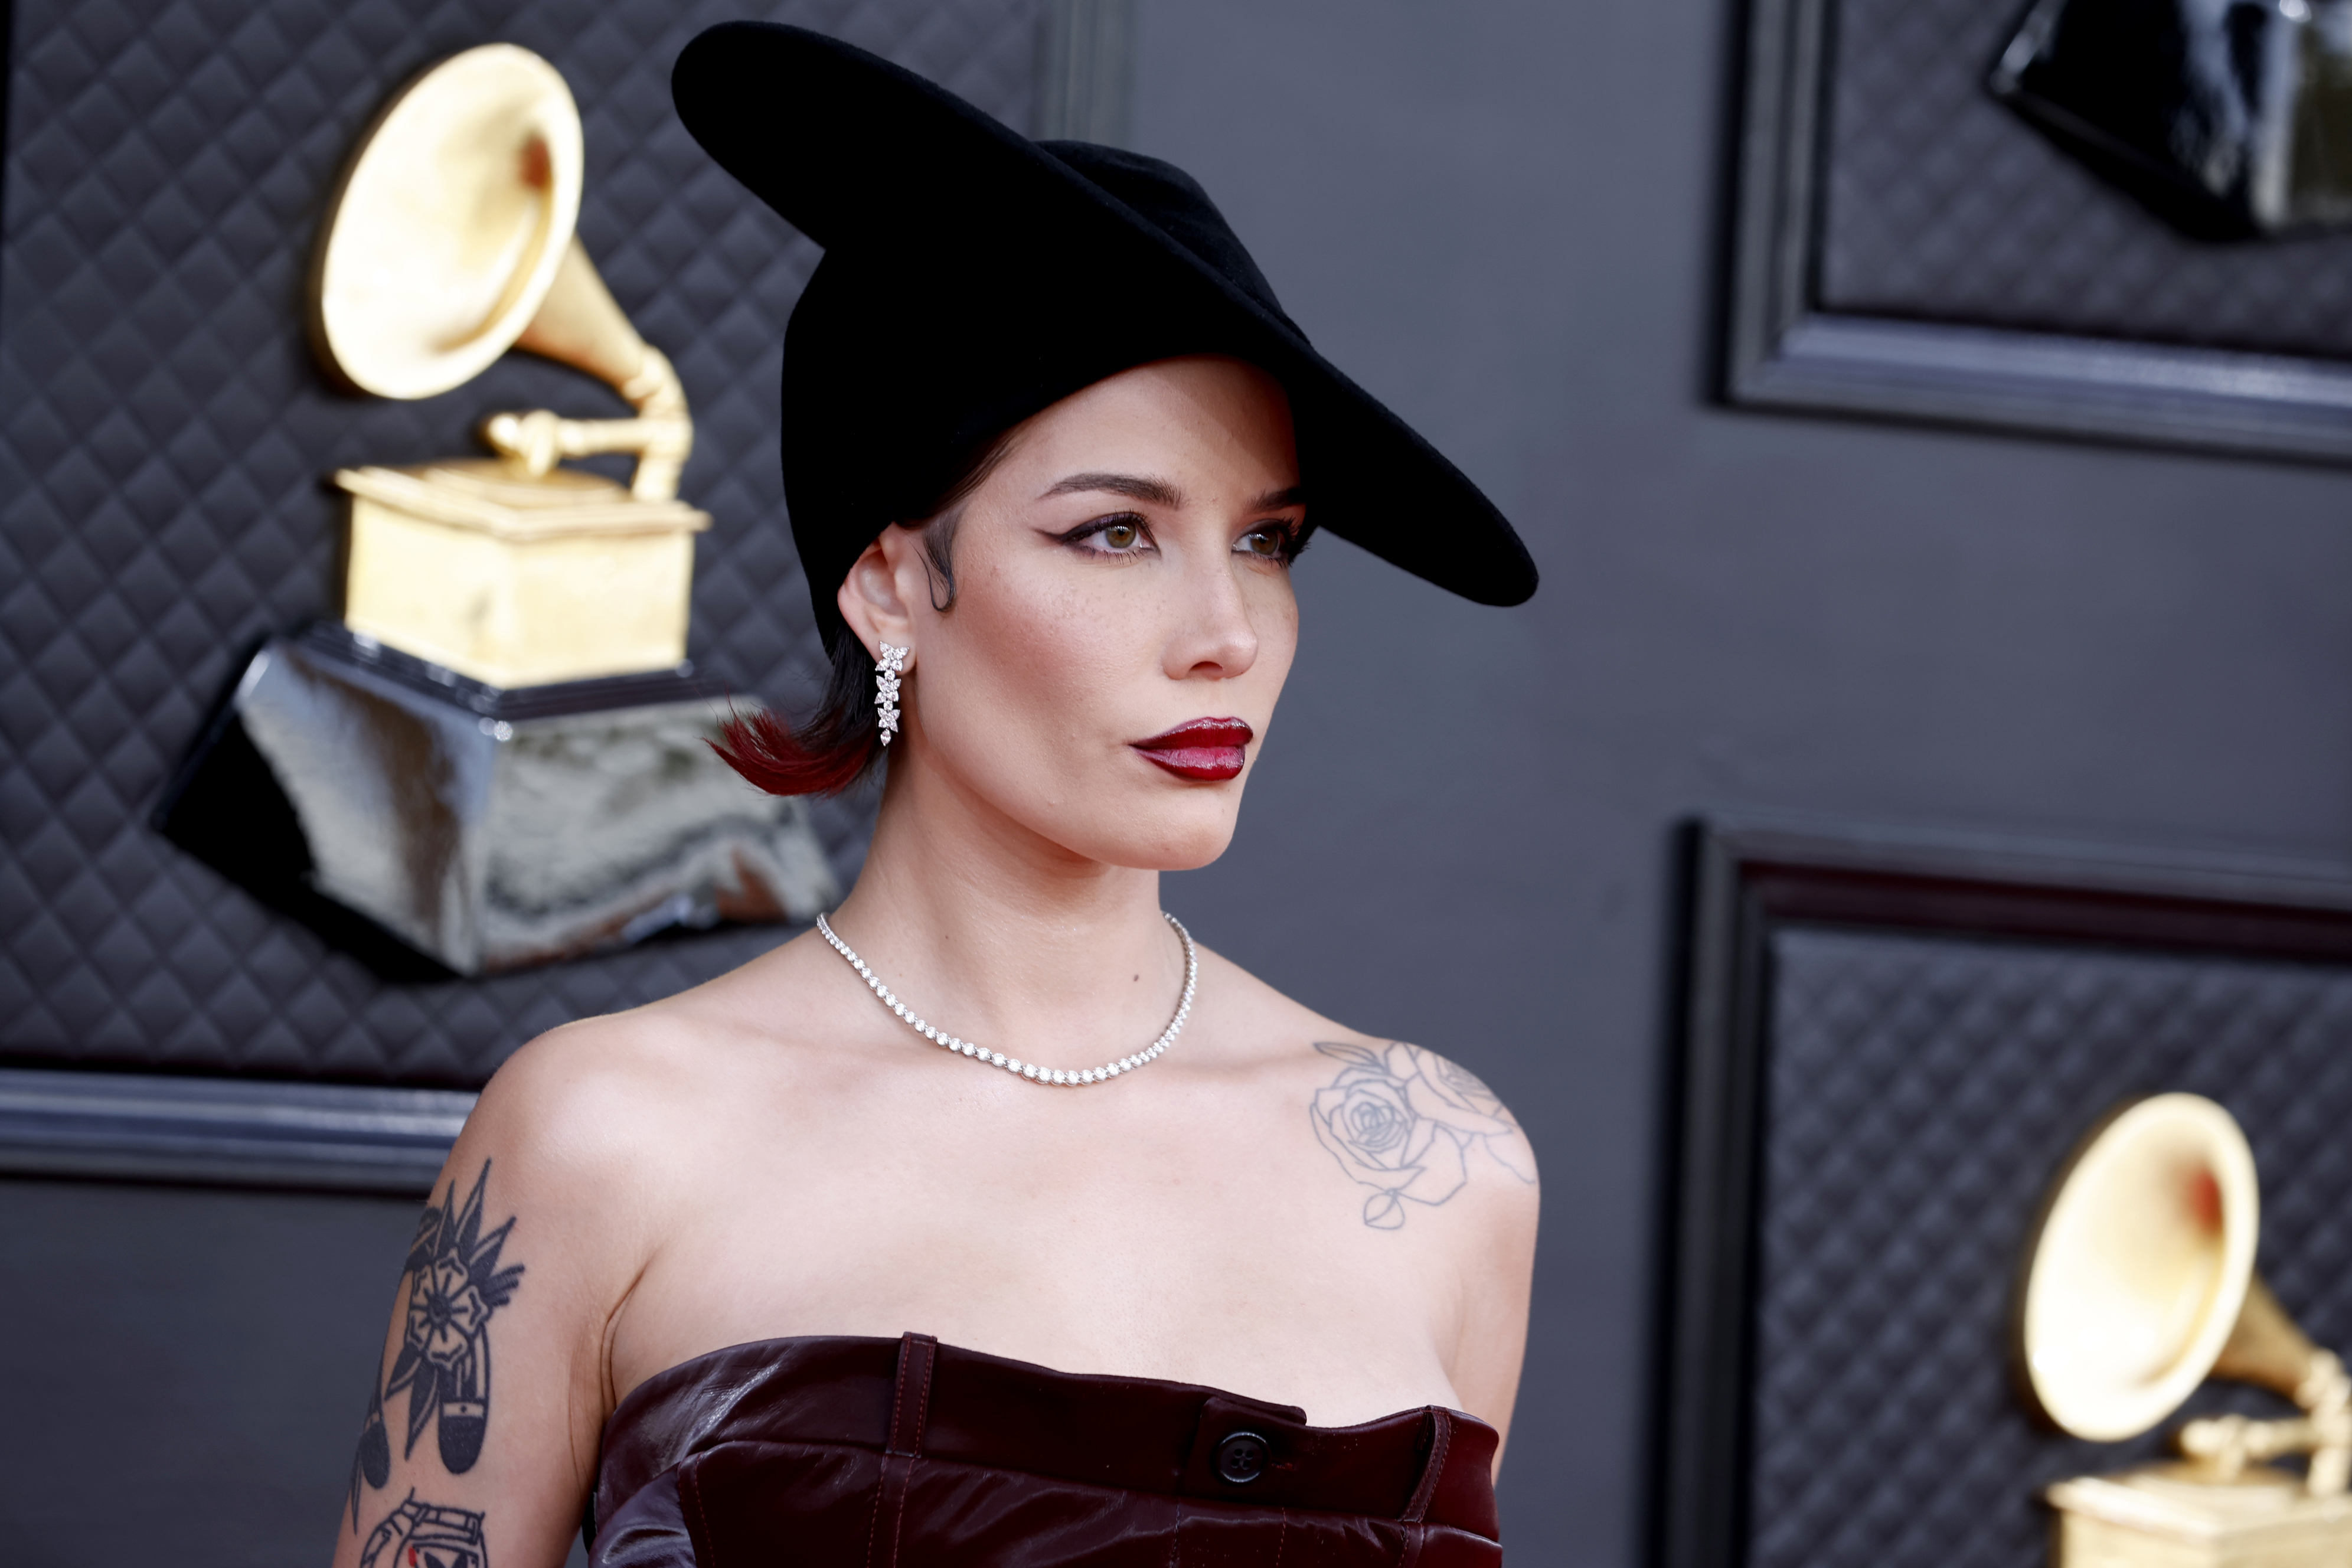 Halsey Isn't the First Artist to Complain About TikTok | Time